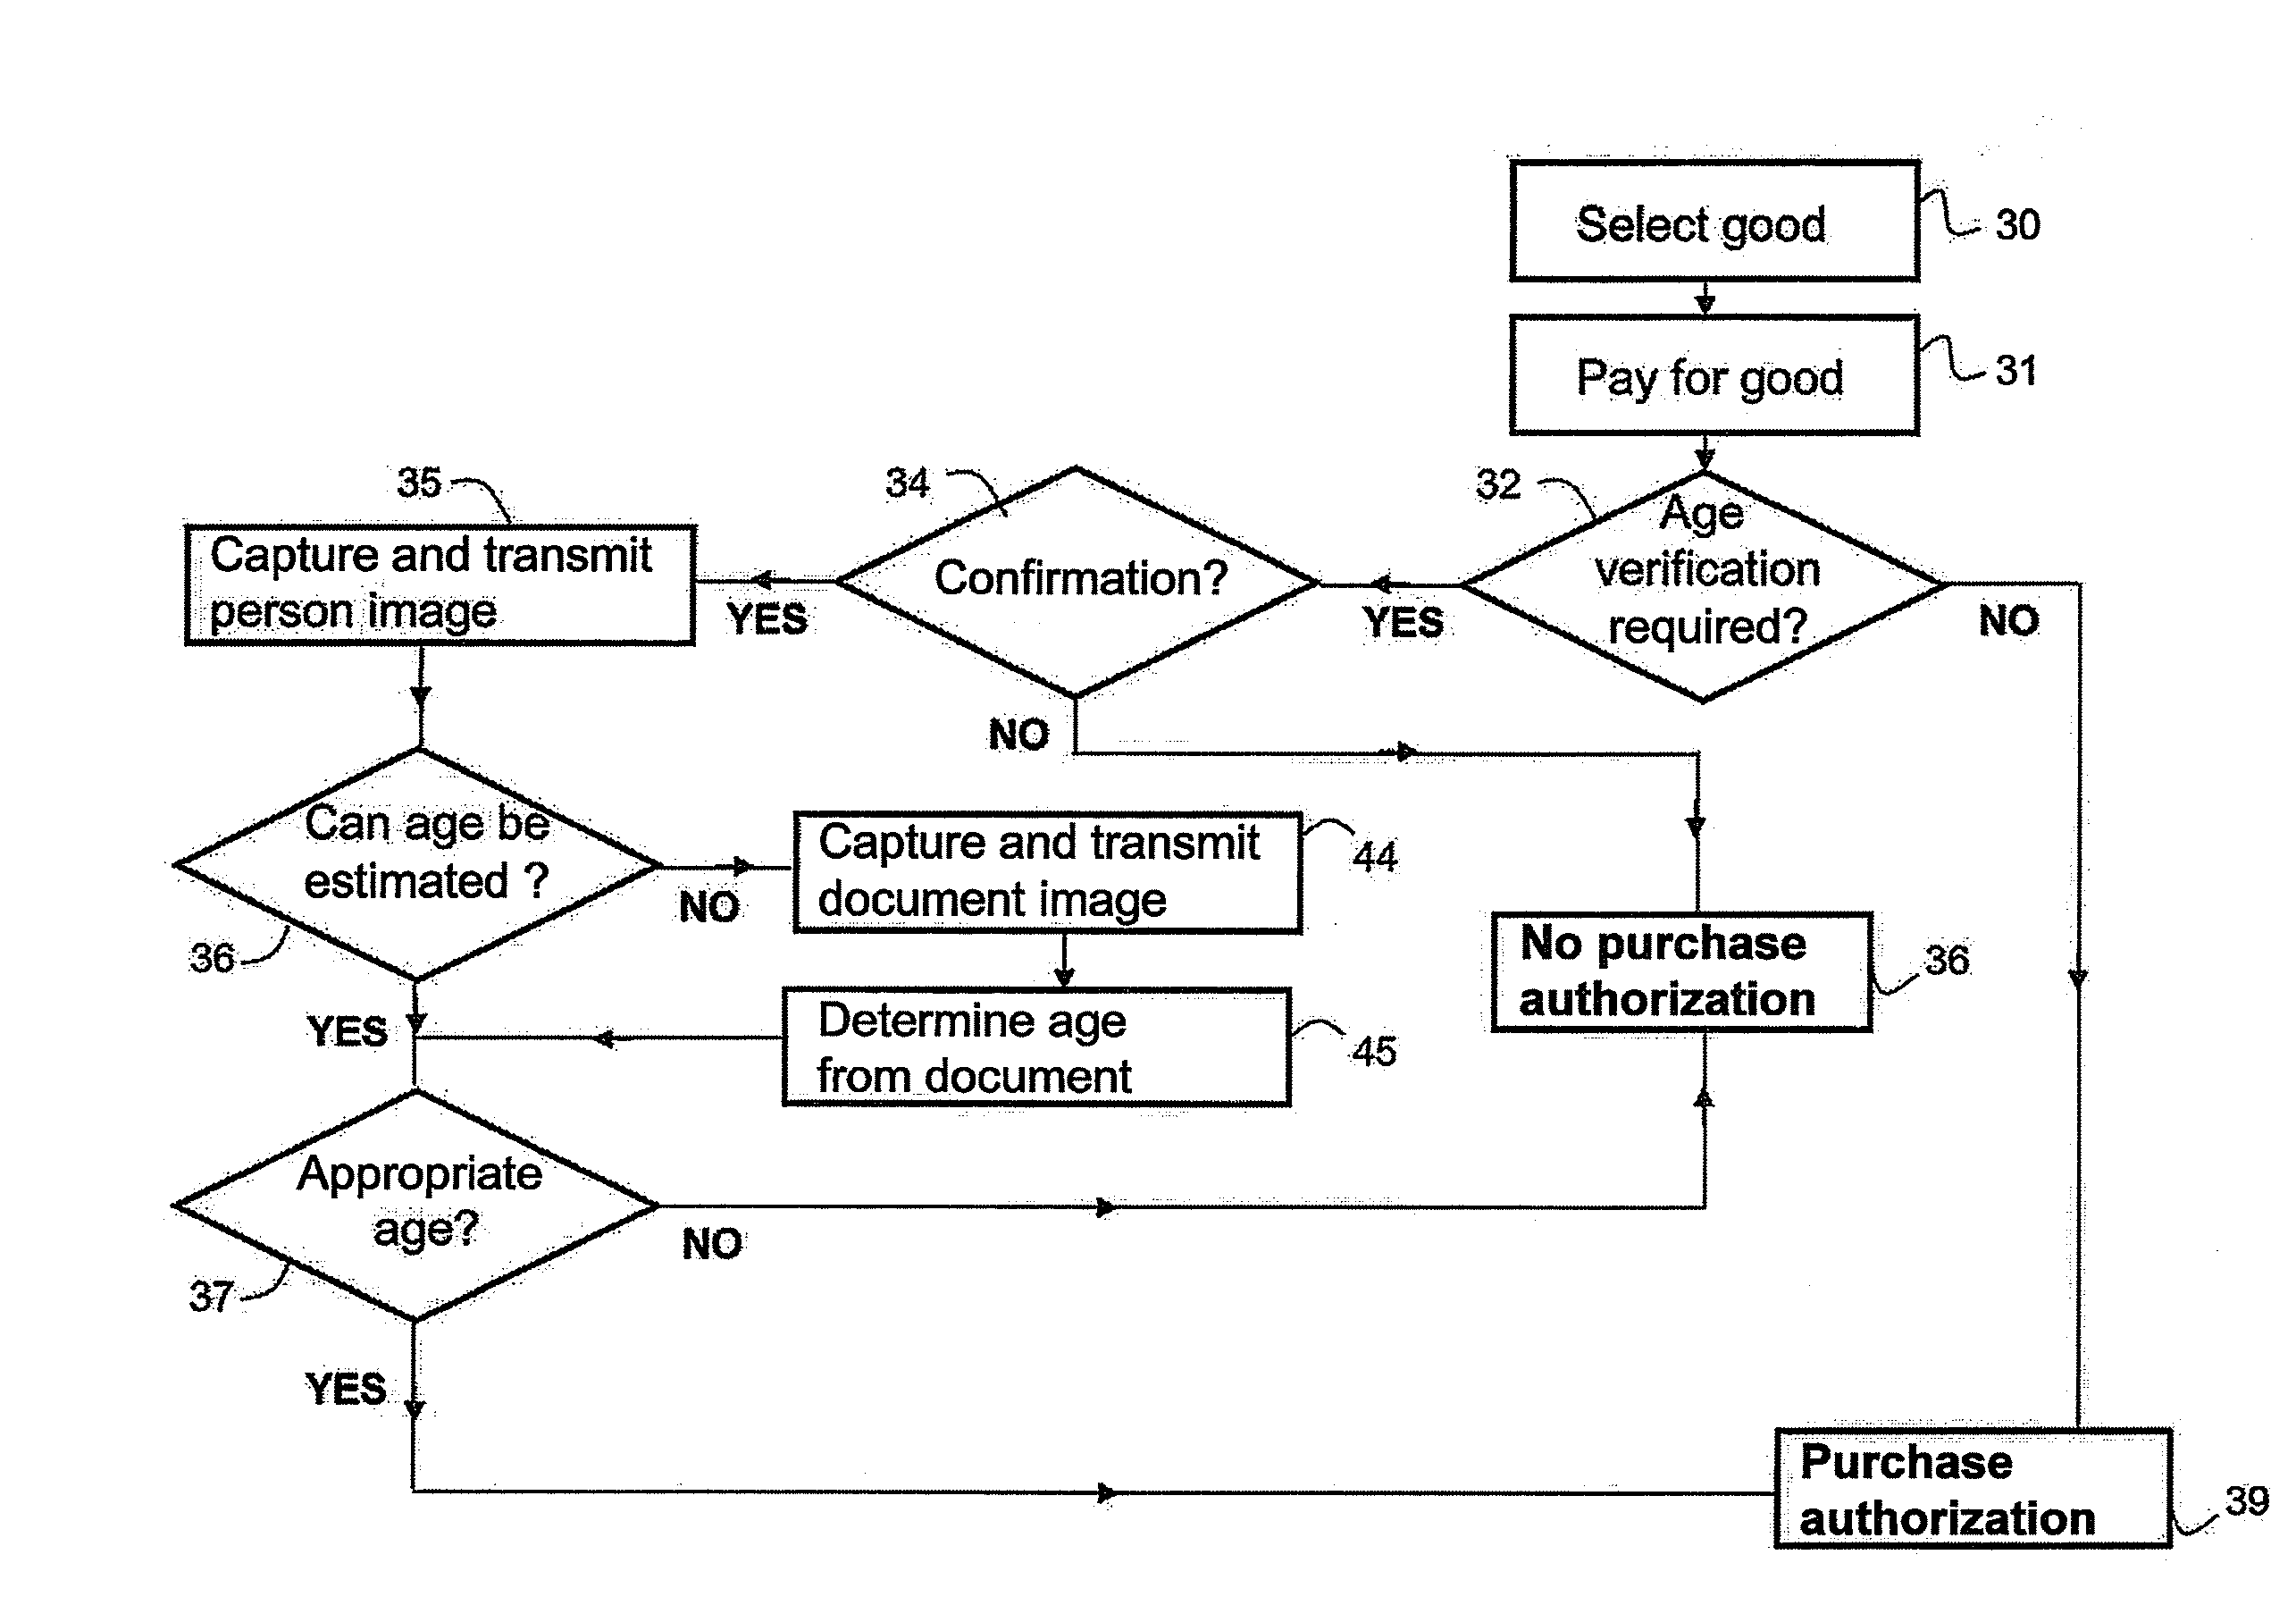 System and method of age verification for selling age-restricted goods from a vending machine